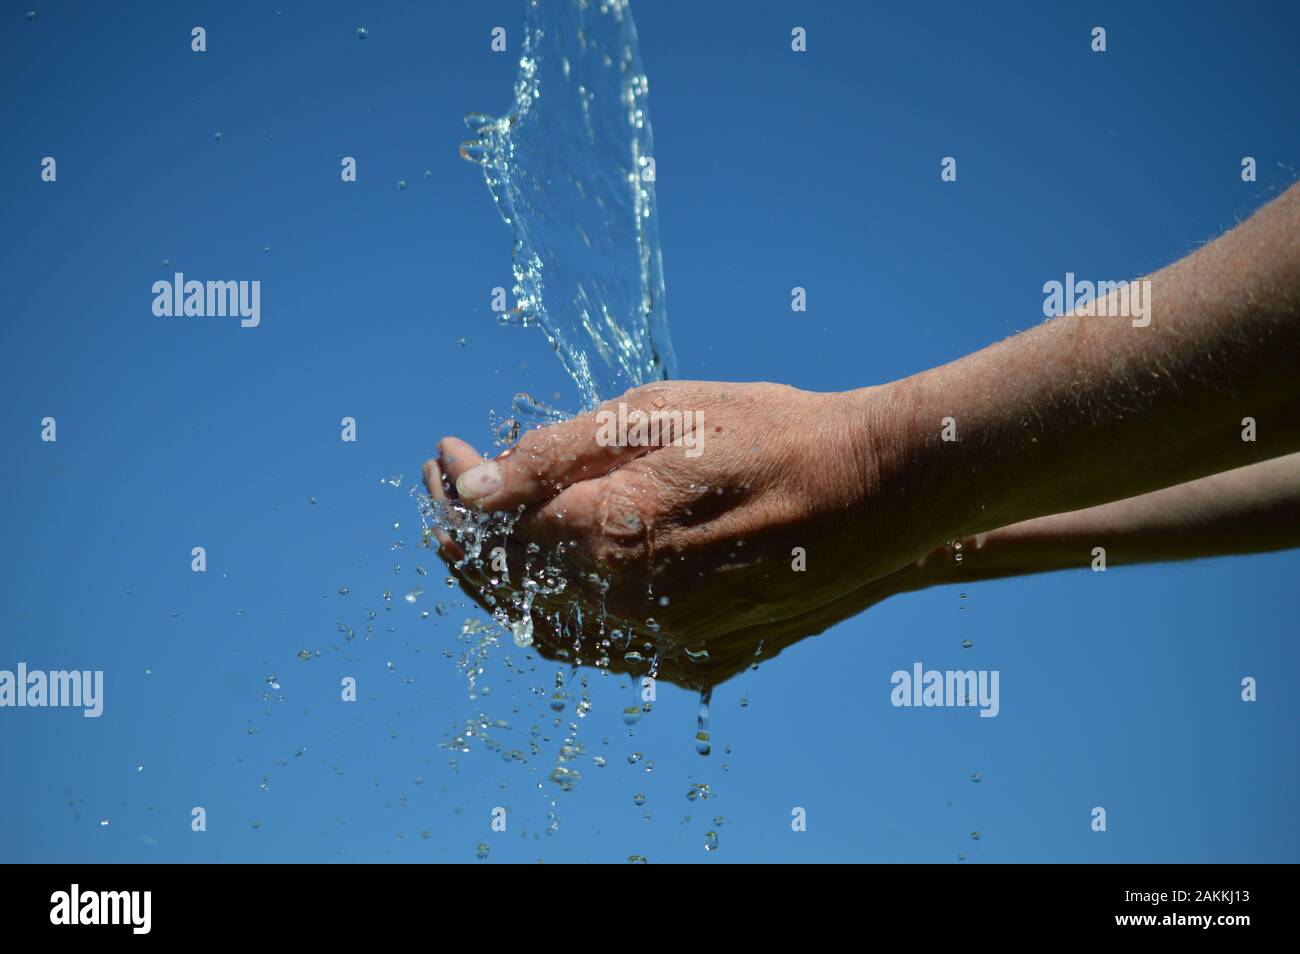 water flowing from the sky into open cupped hands Stock Photo